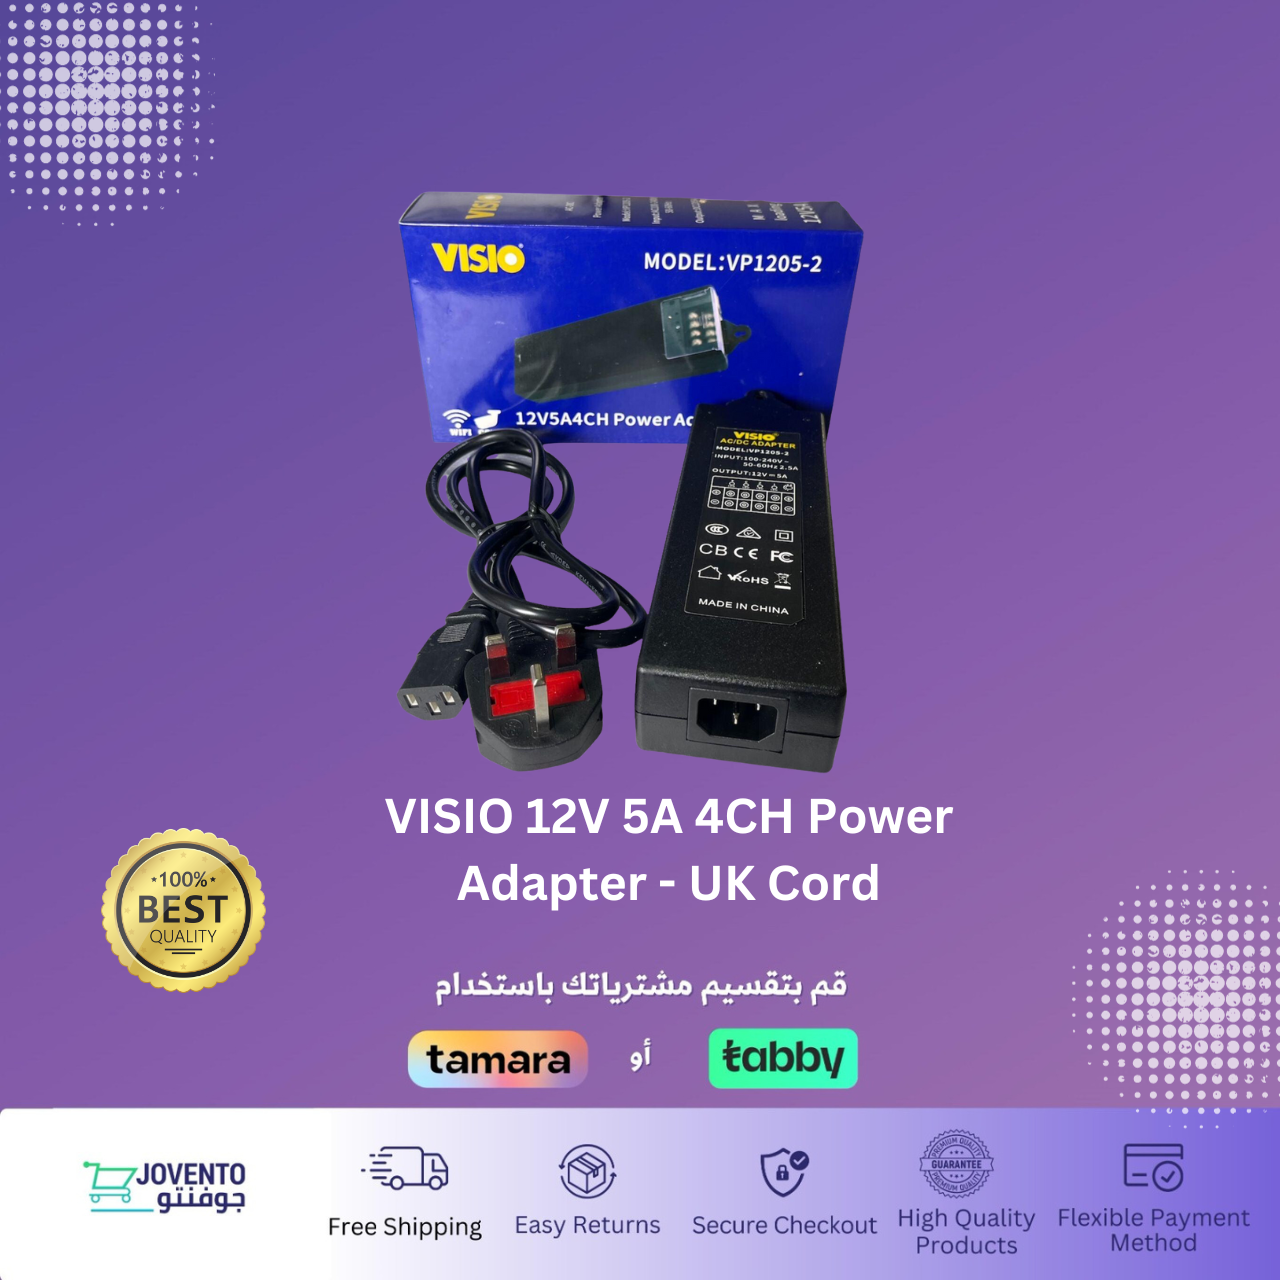 VISIO 12V 5A 4CH Power Adapter - UK Cord